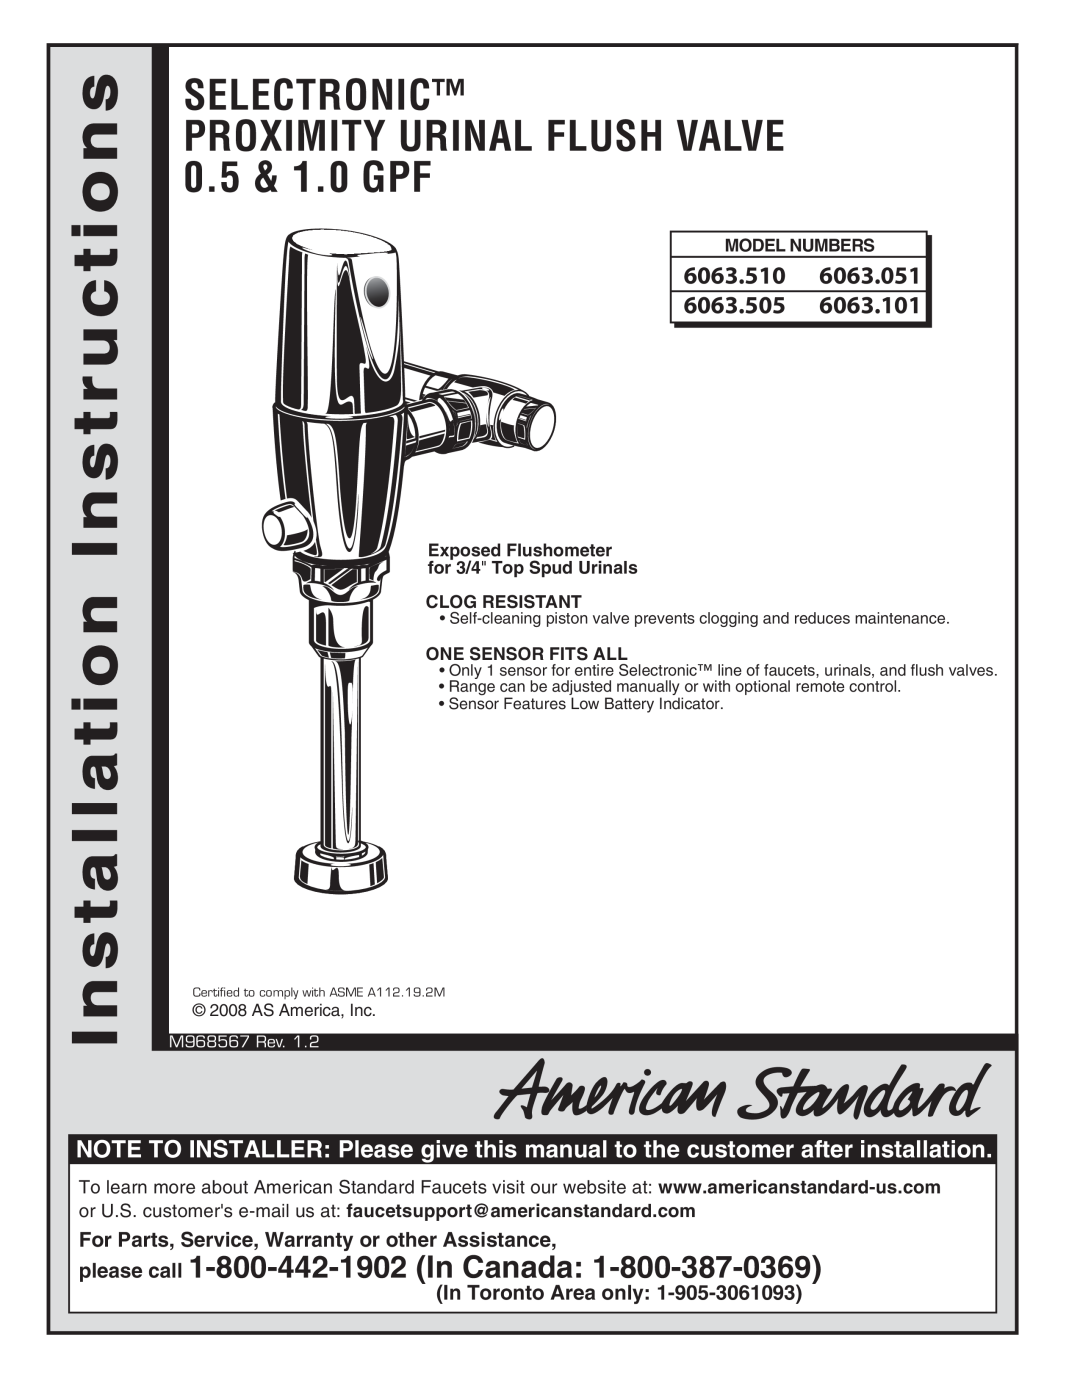 American Standard 6063.051, 6063.505 installation instructions 6063.510, For Parts, Service, Warranty or other Assistance 